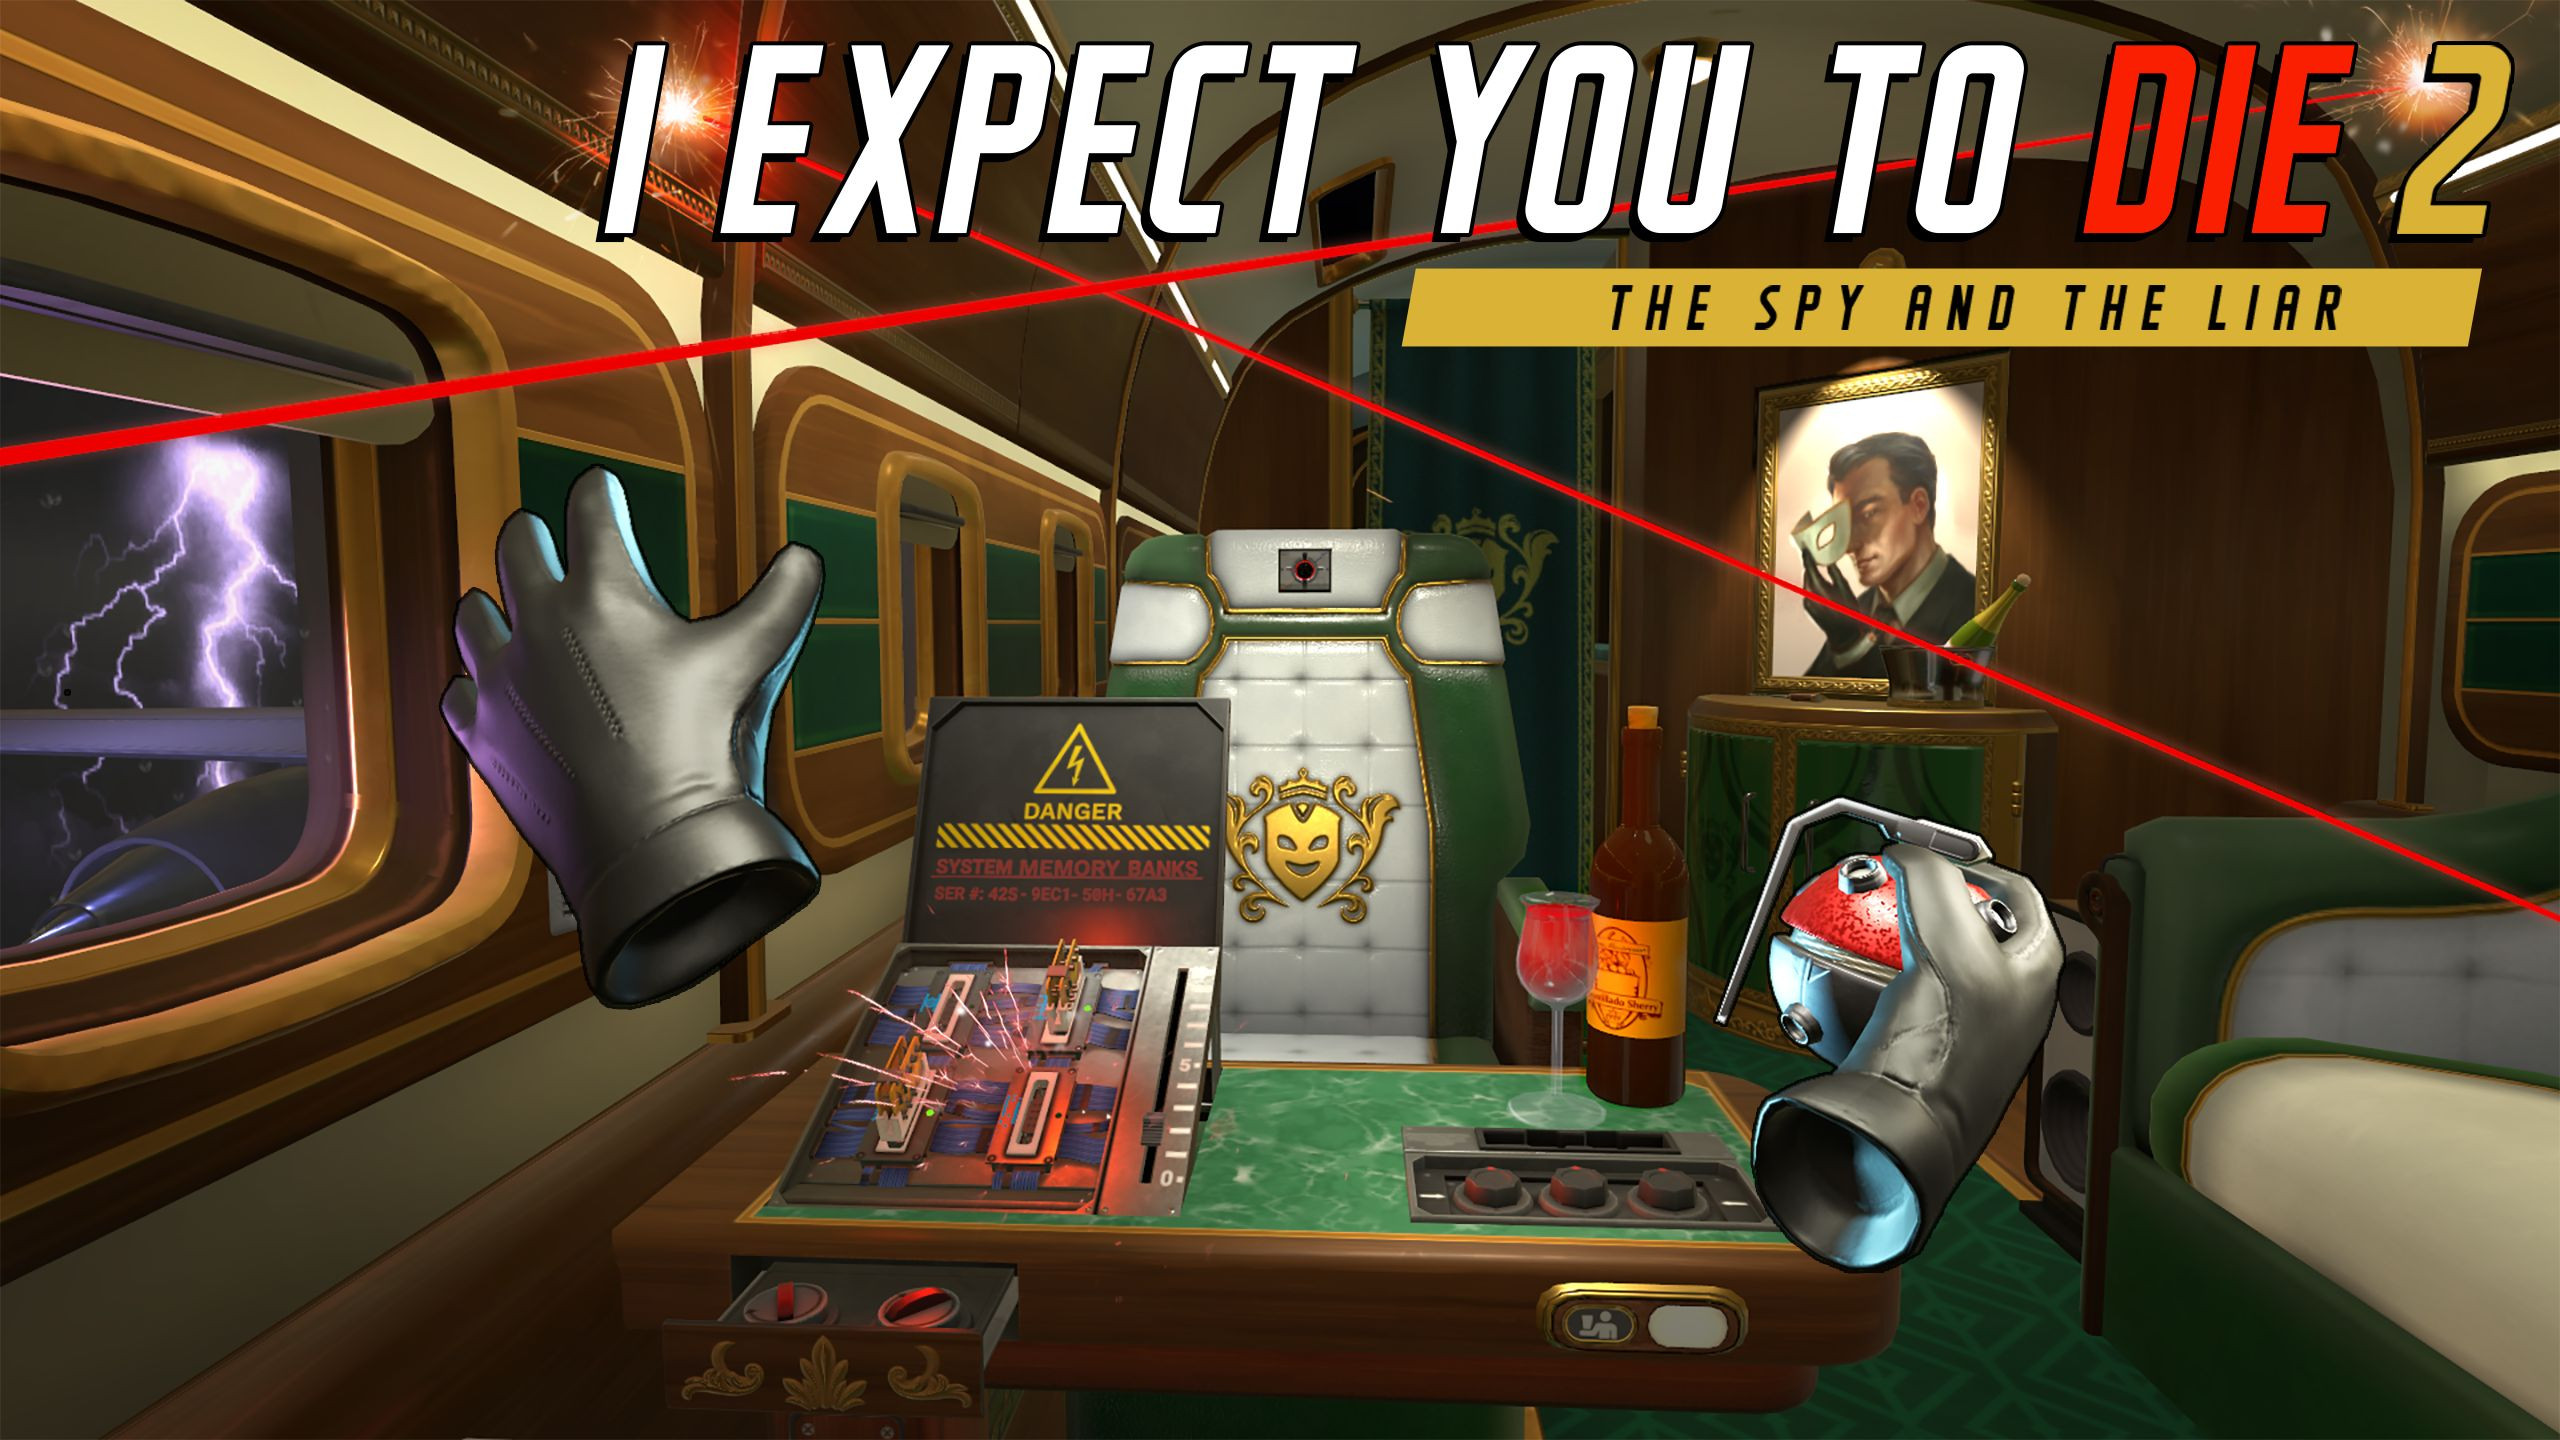 I Expect You To Die 2 review – No Mr Bond, I expect you to play